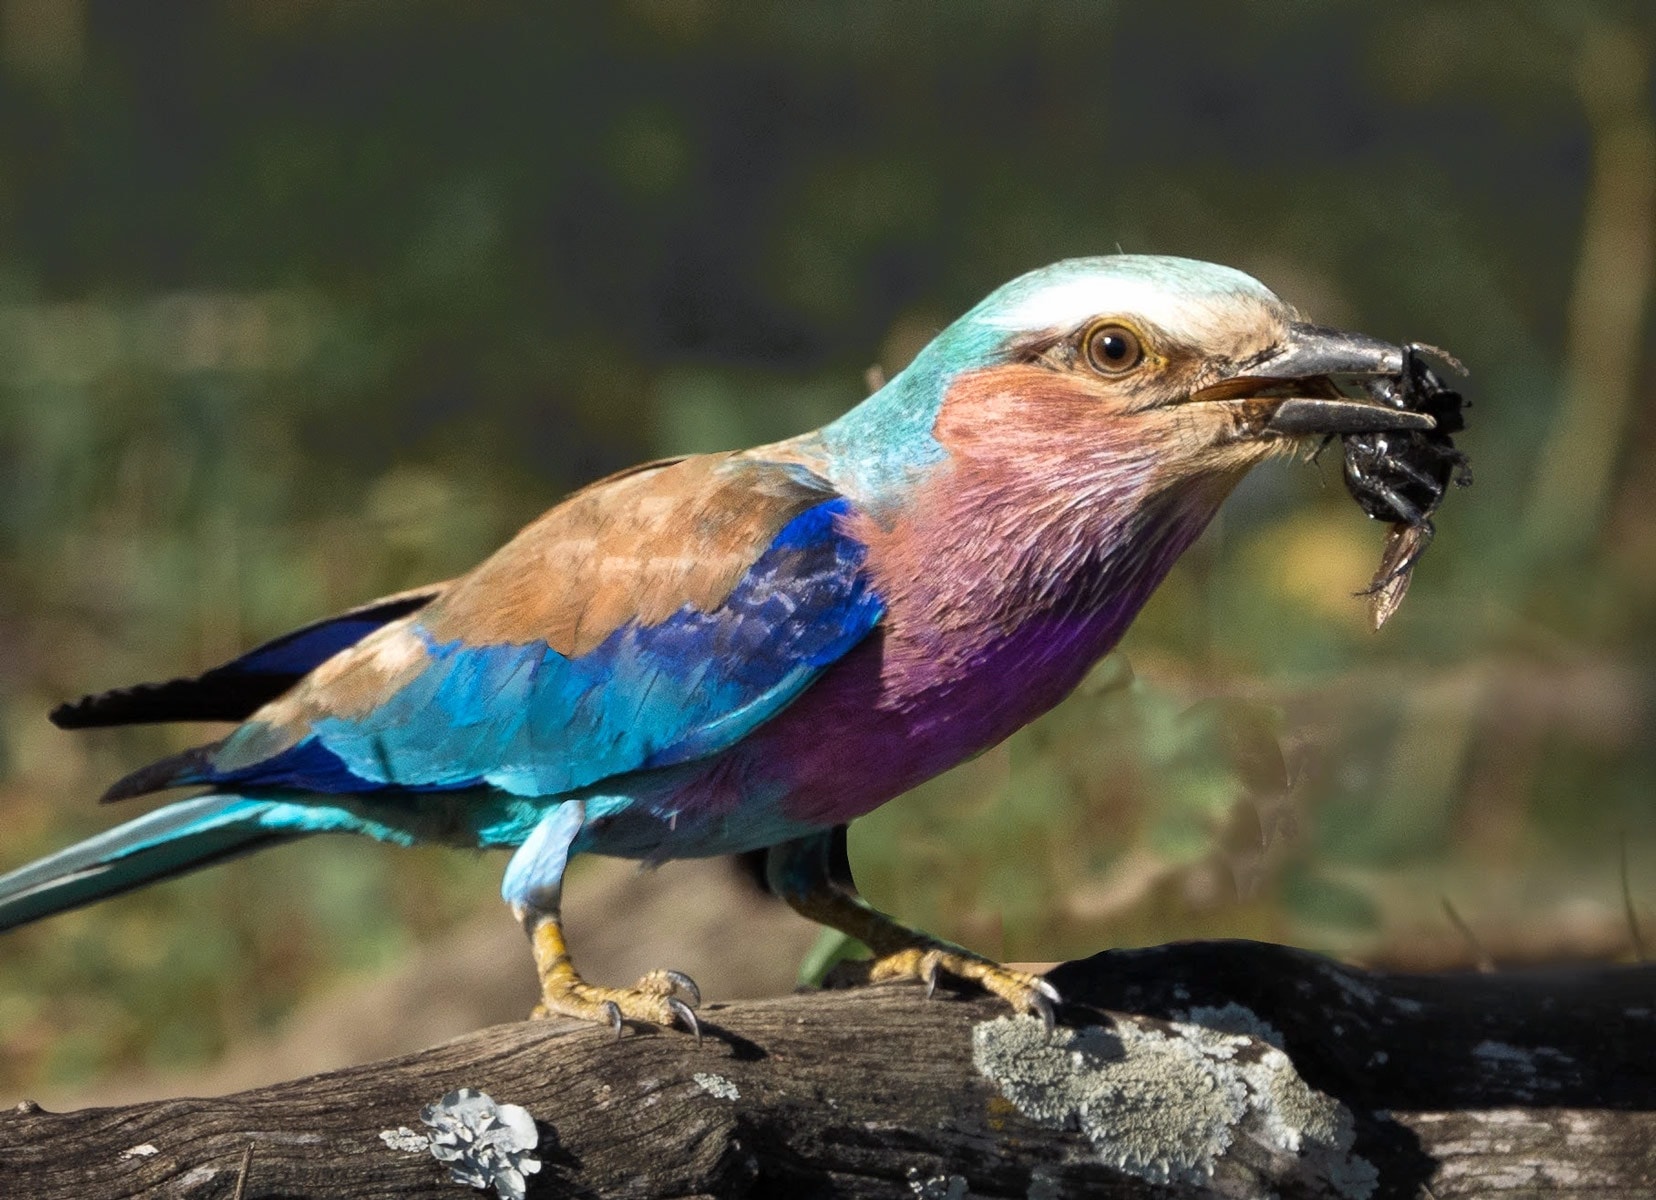 lilac-roller-with-bug in mouth